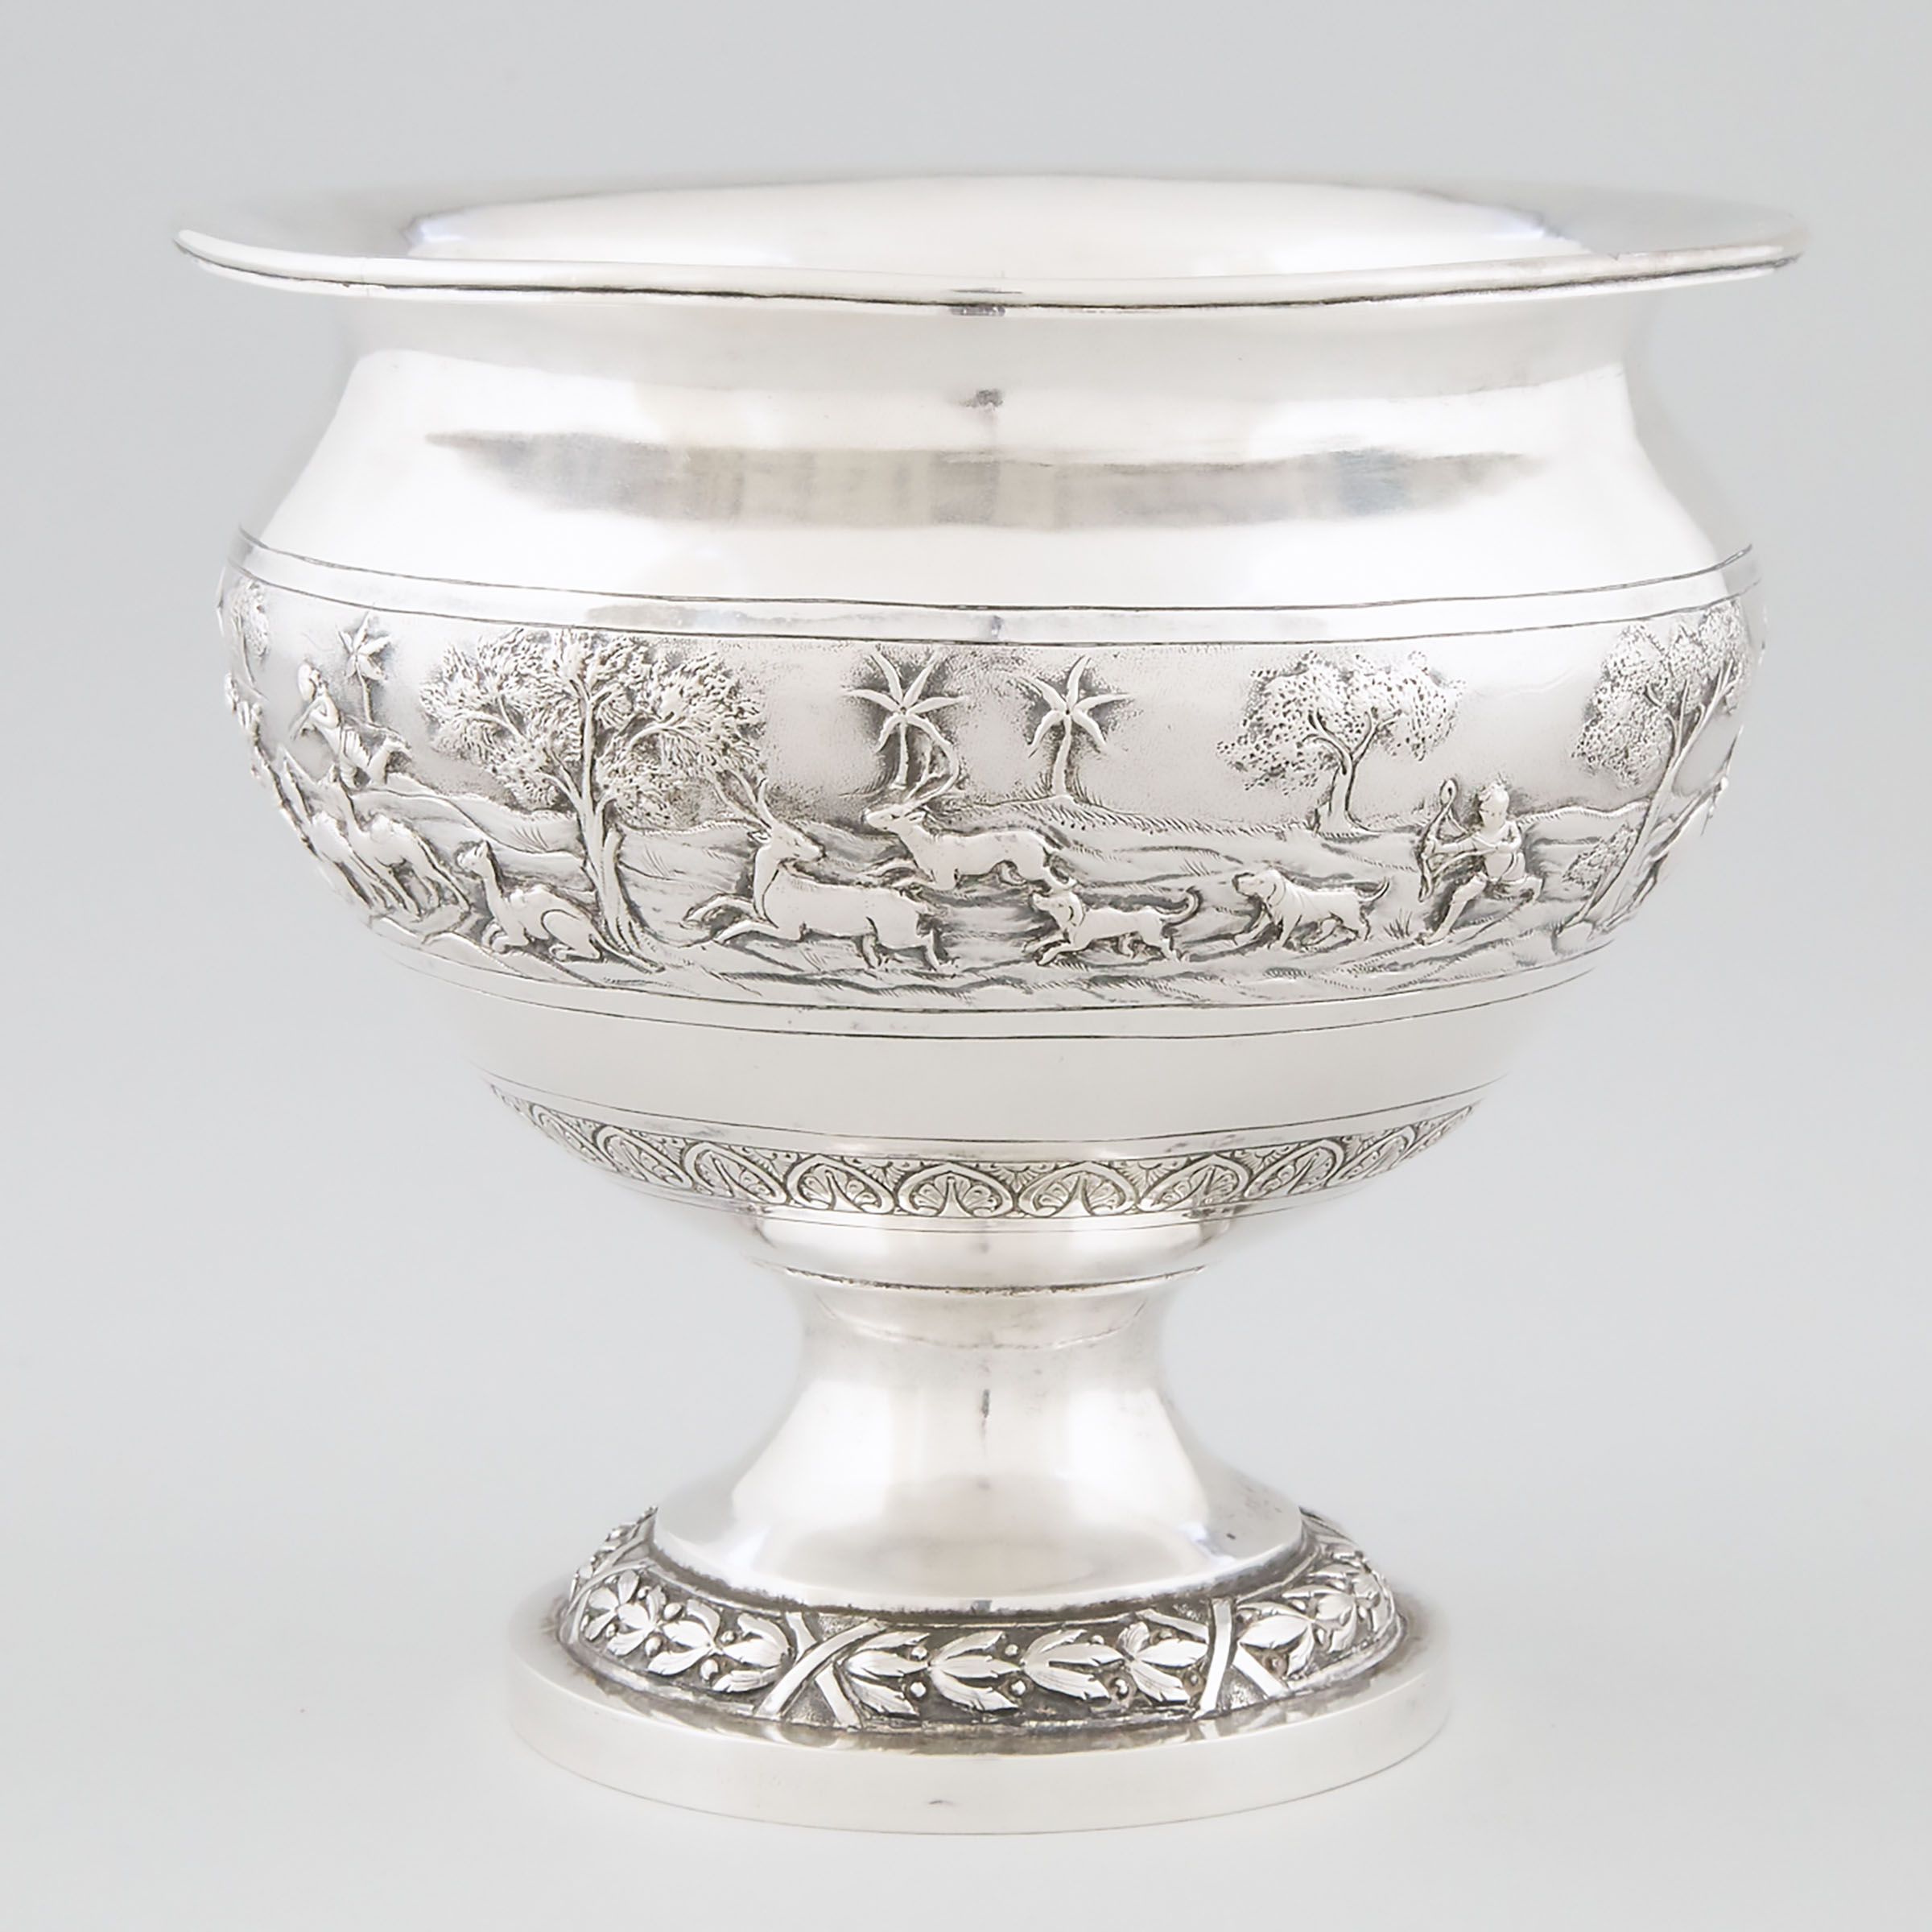 Indian Silver Footed Bowl, early 20th century